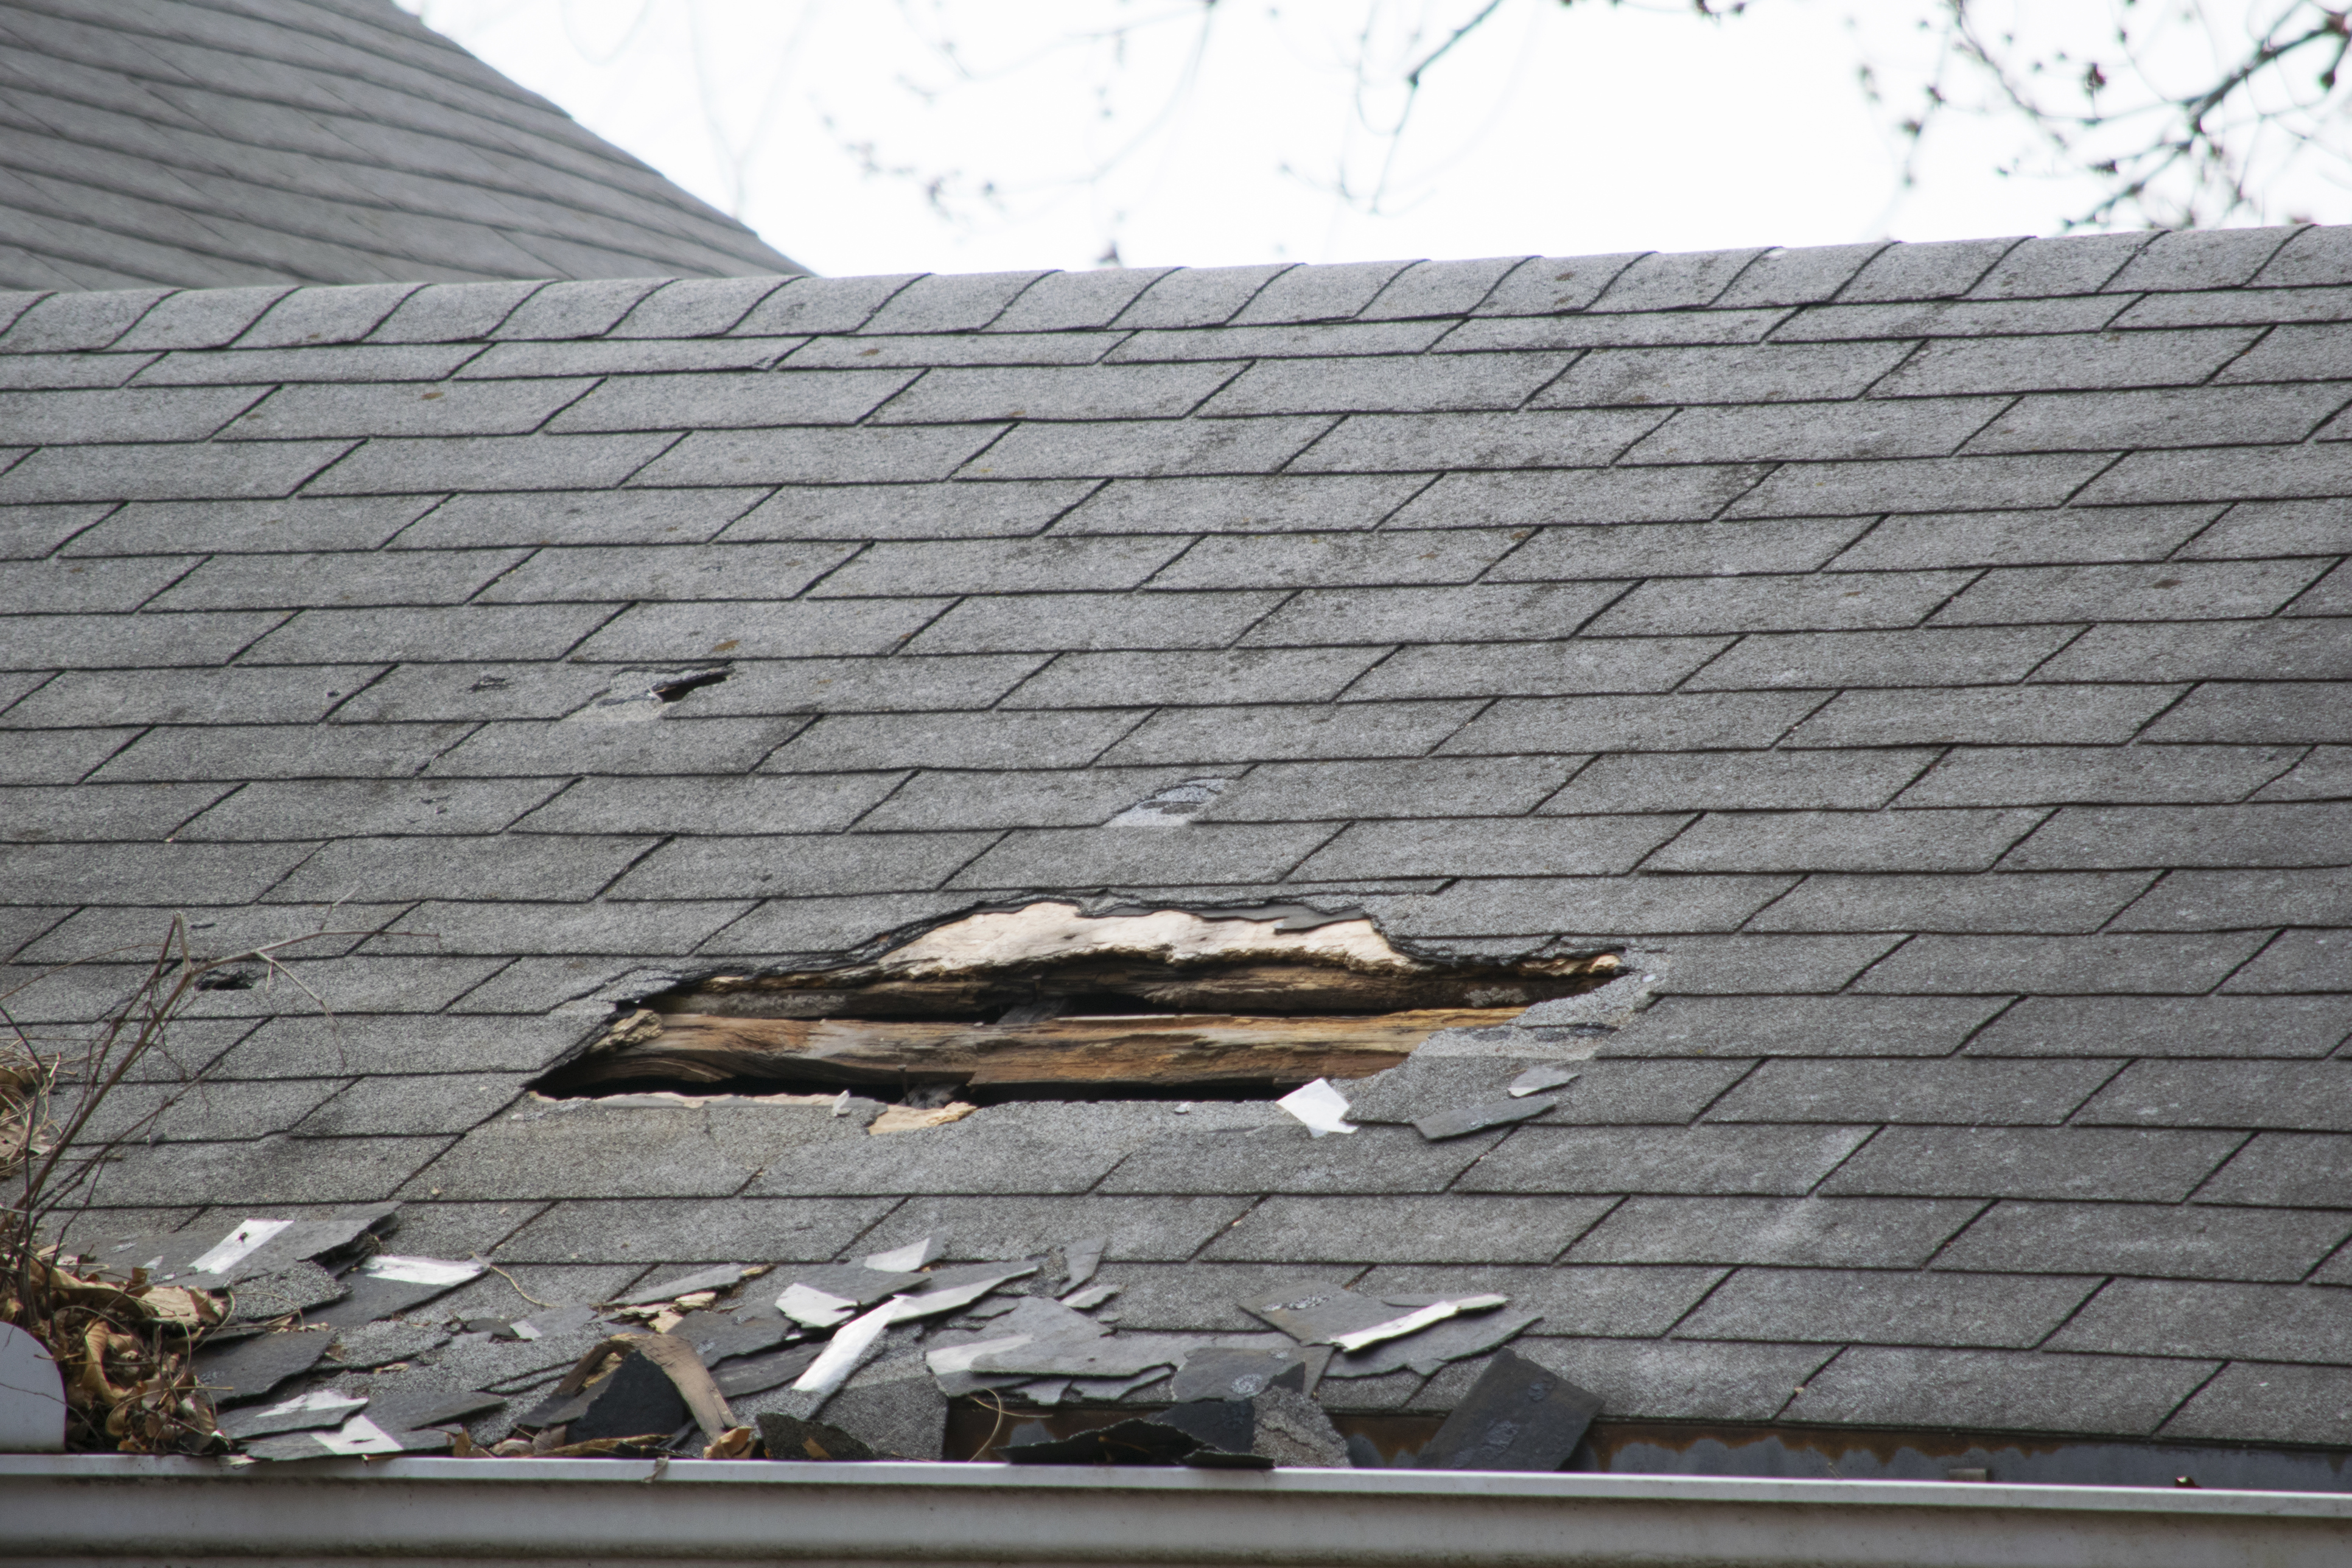 When your roof suffers damage from a storm, contact the roofing experts at Thomas Quality Construction.